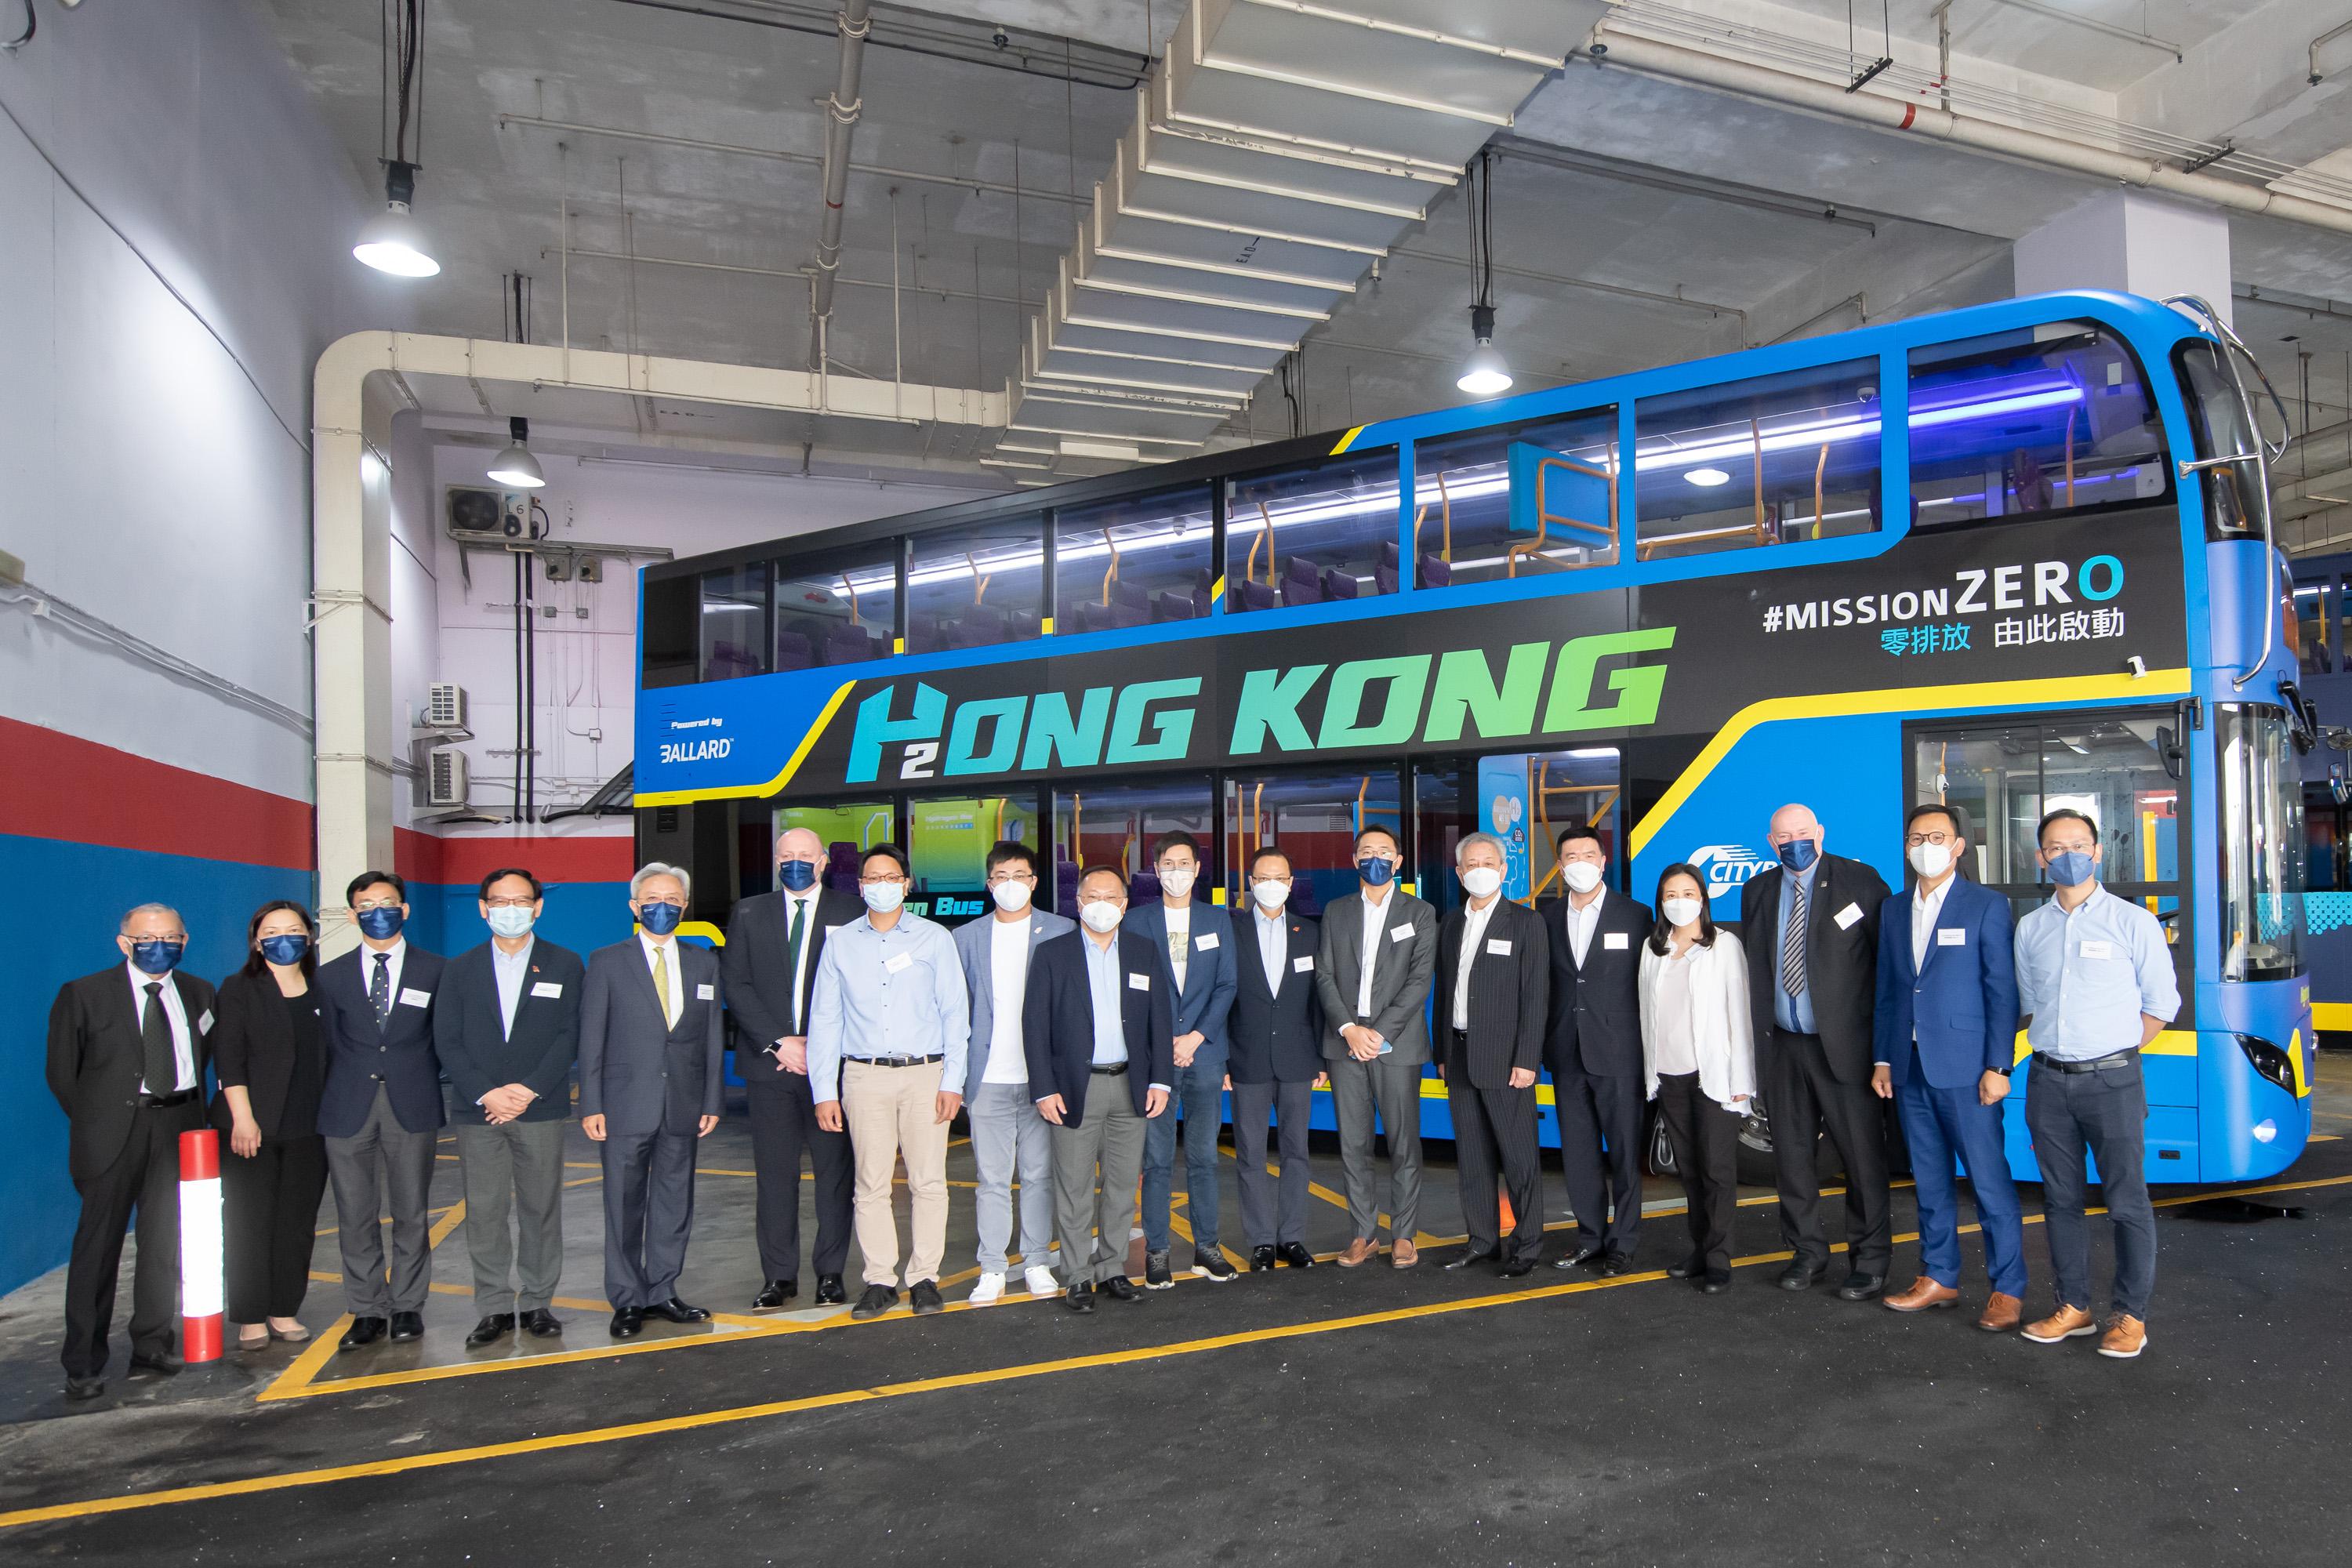 The Legislative Council (LegCo) Panel on Transport visited the Citybus Limited (Citybus) Headquarter today (August 19) to observe their facilities, including the world’s first tri-axle hydrogen fuel cell double deck bus. Photo shows LegCo Members taking a group photo with the management of Citybus at the Citybus Headquarter.